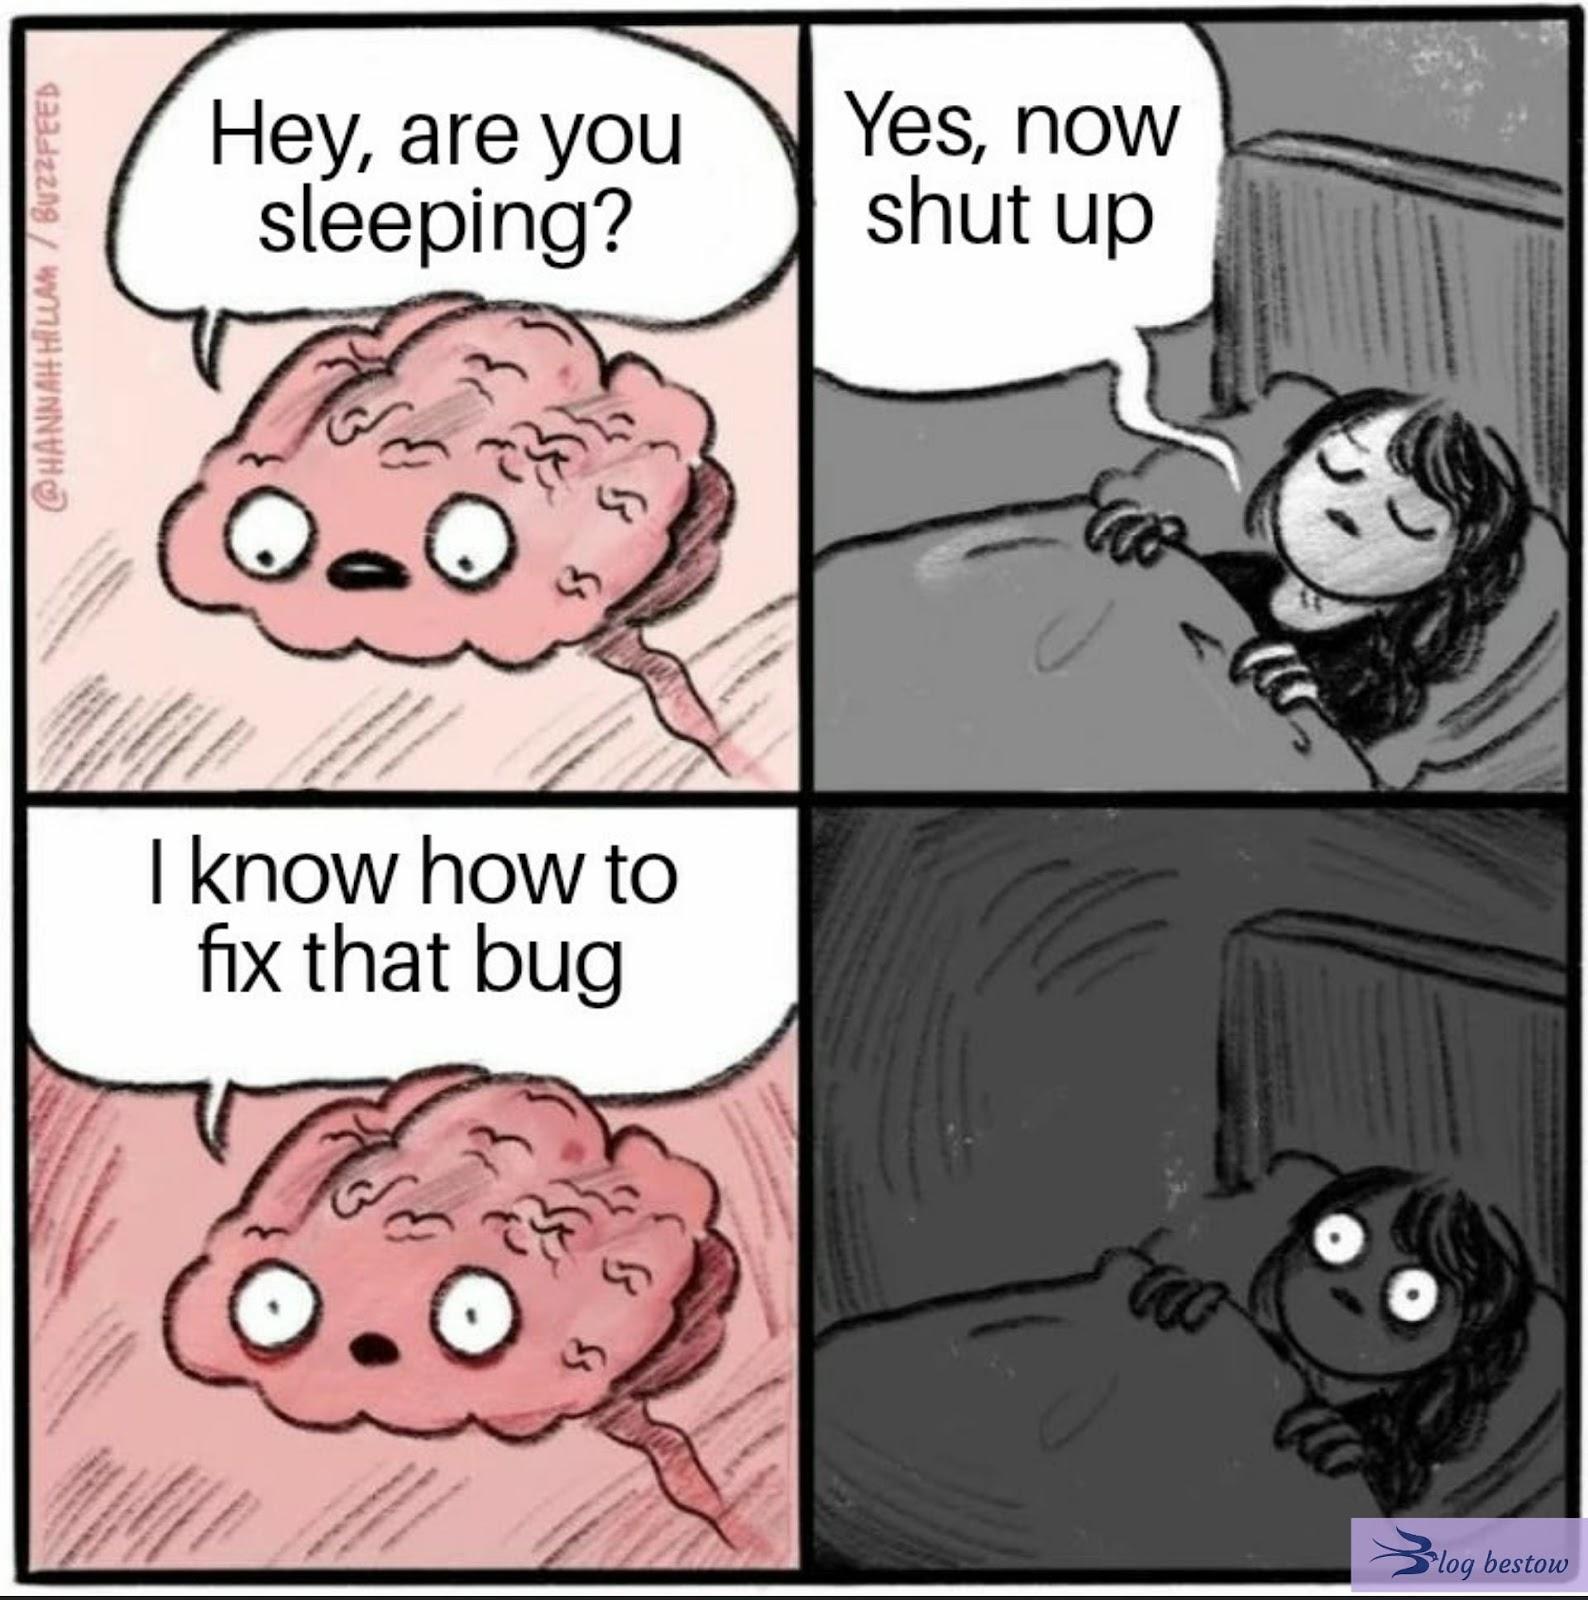 No sleep for programmers